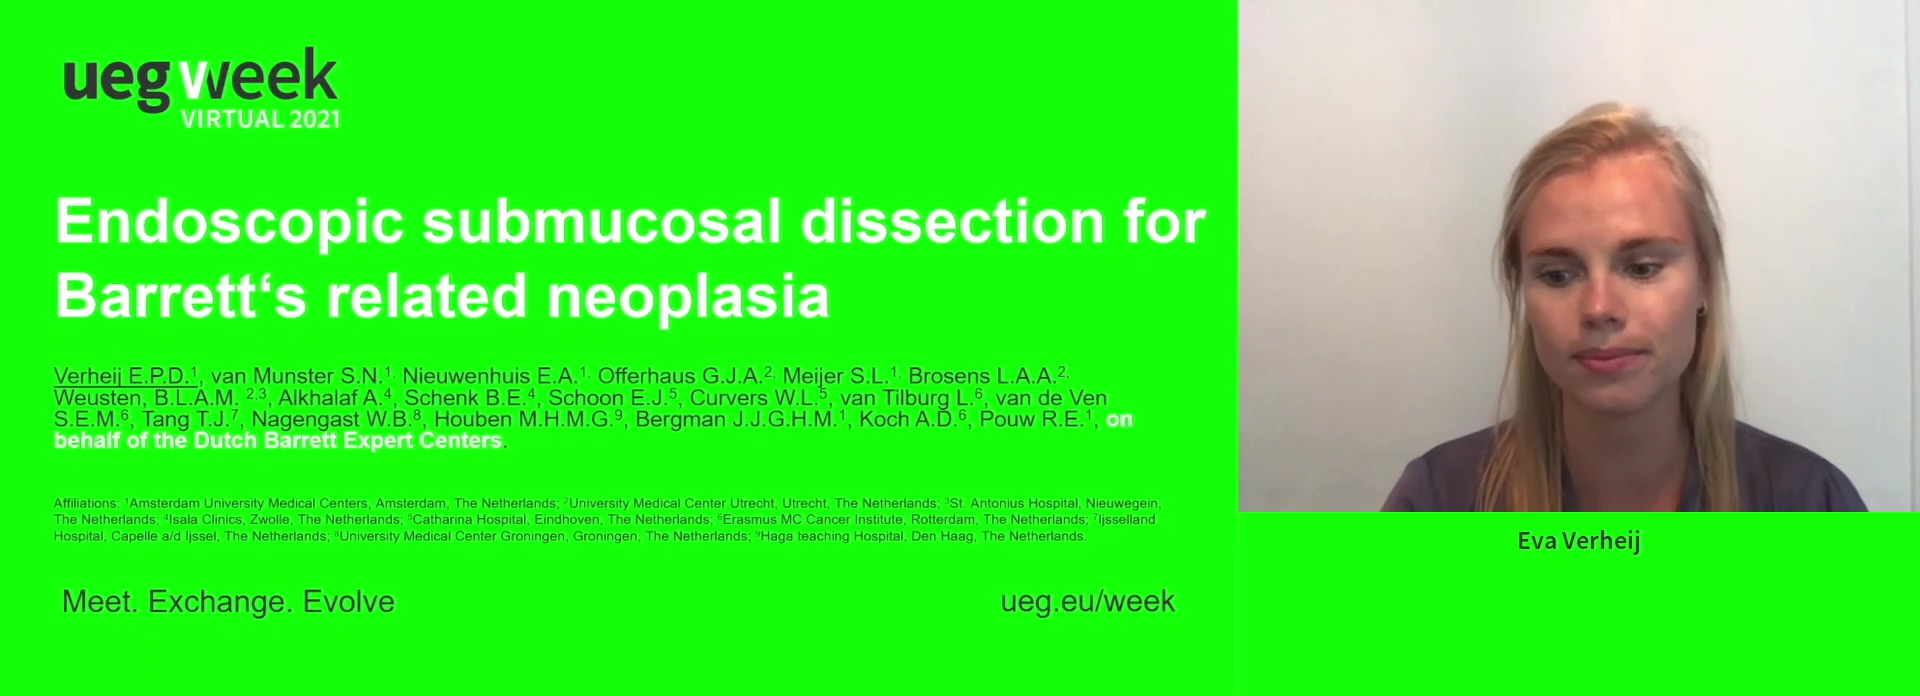 ENDOSCOPIC SUBMUCOSAL DISSECTION FOR BARRETT'S RELATED NEOPLASIA IN THE NETHERLANDS: RESULTS OF A NATIONWIDE COHORT OF 130 CASES